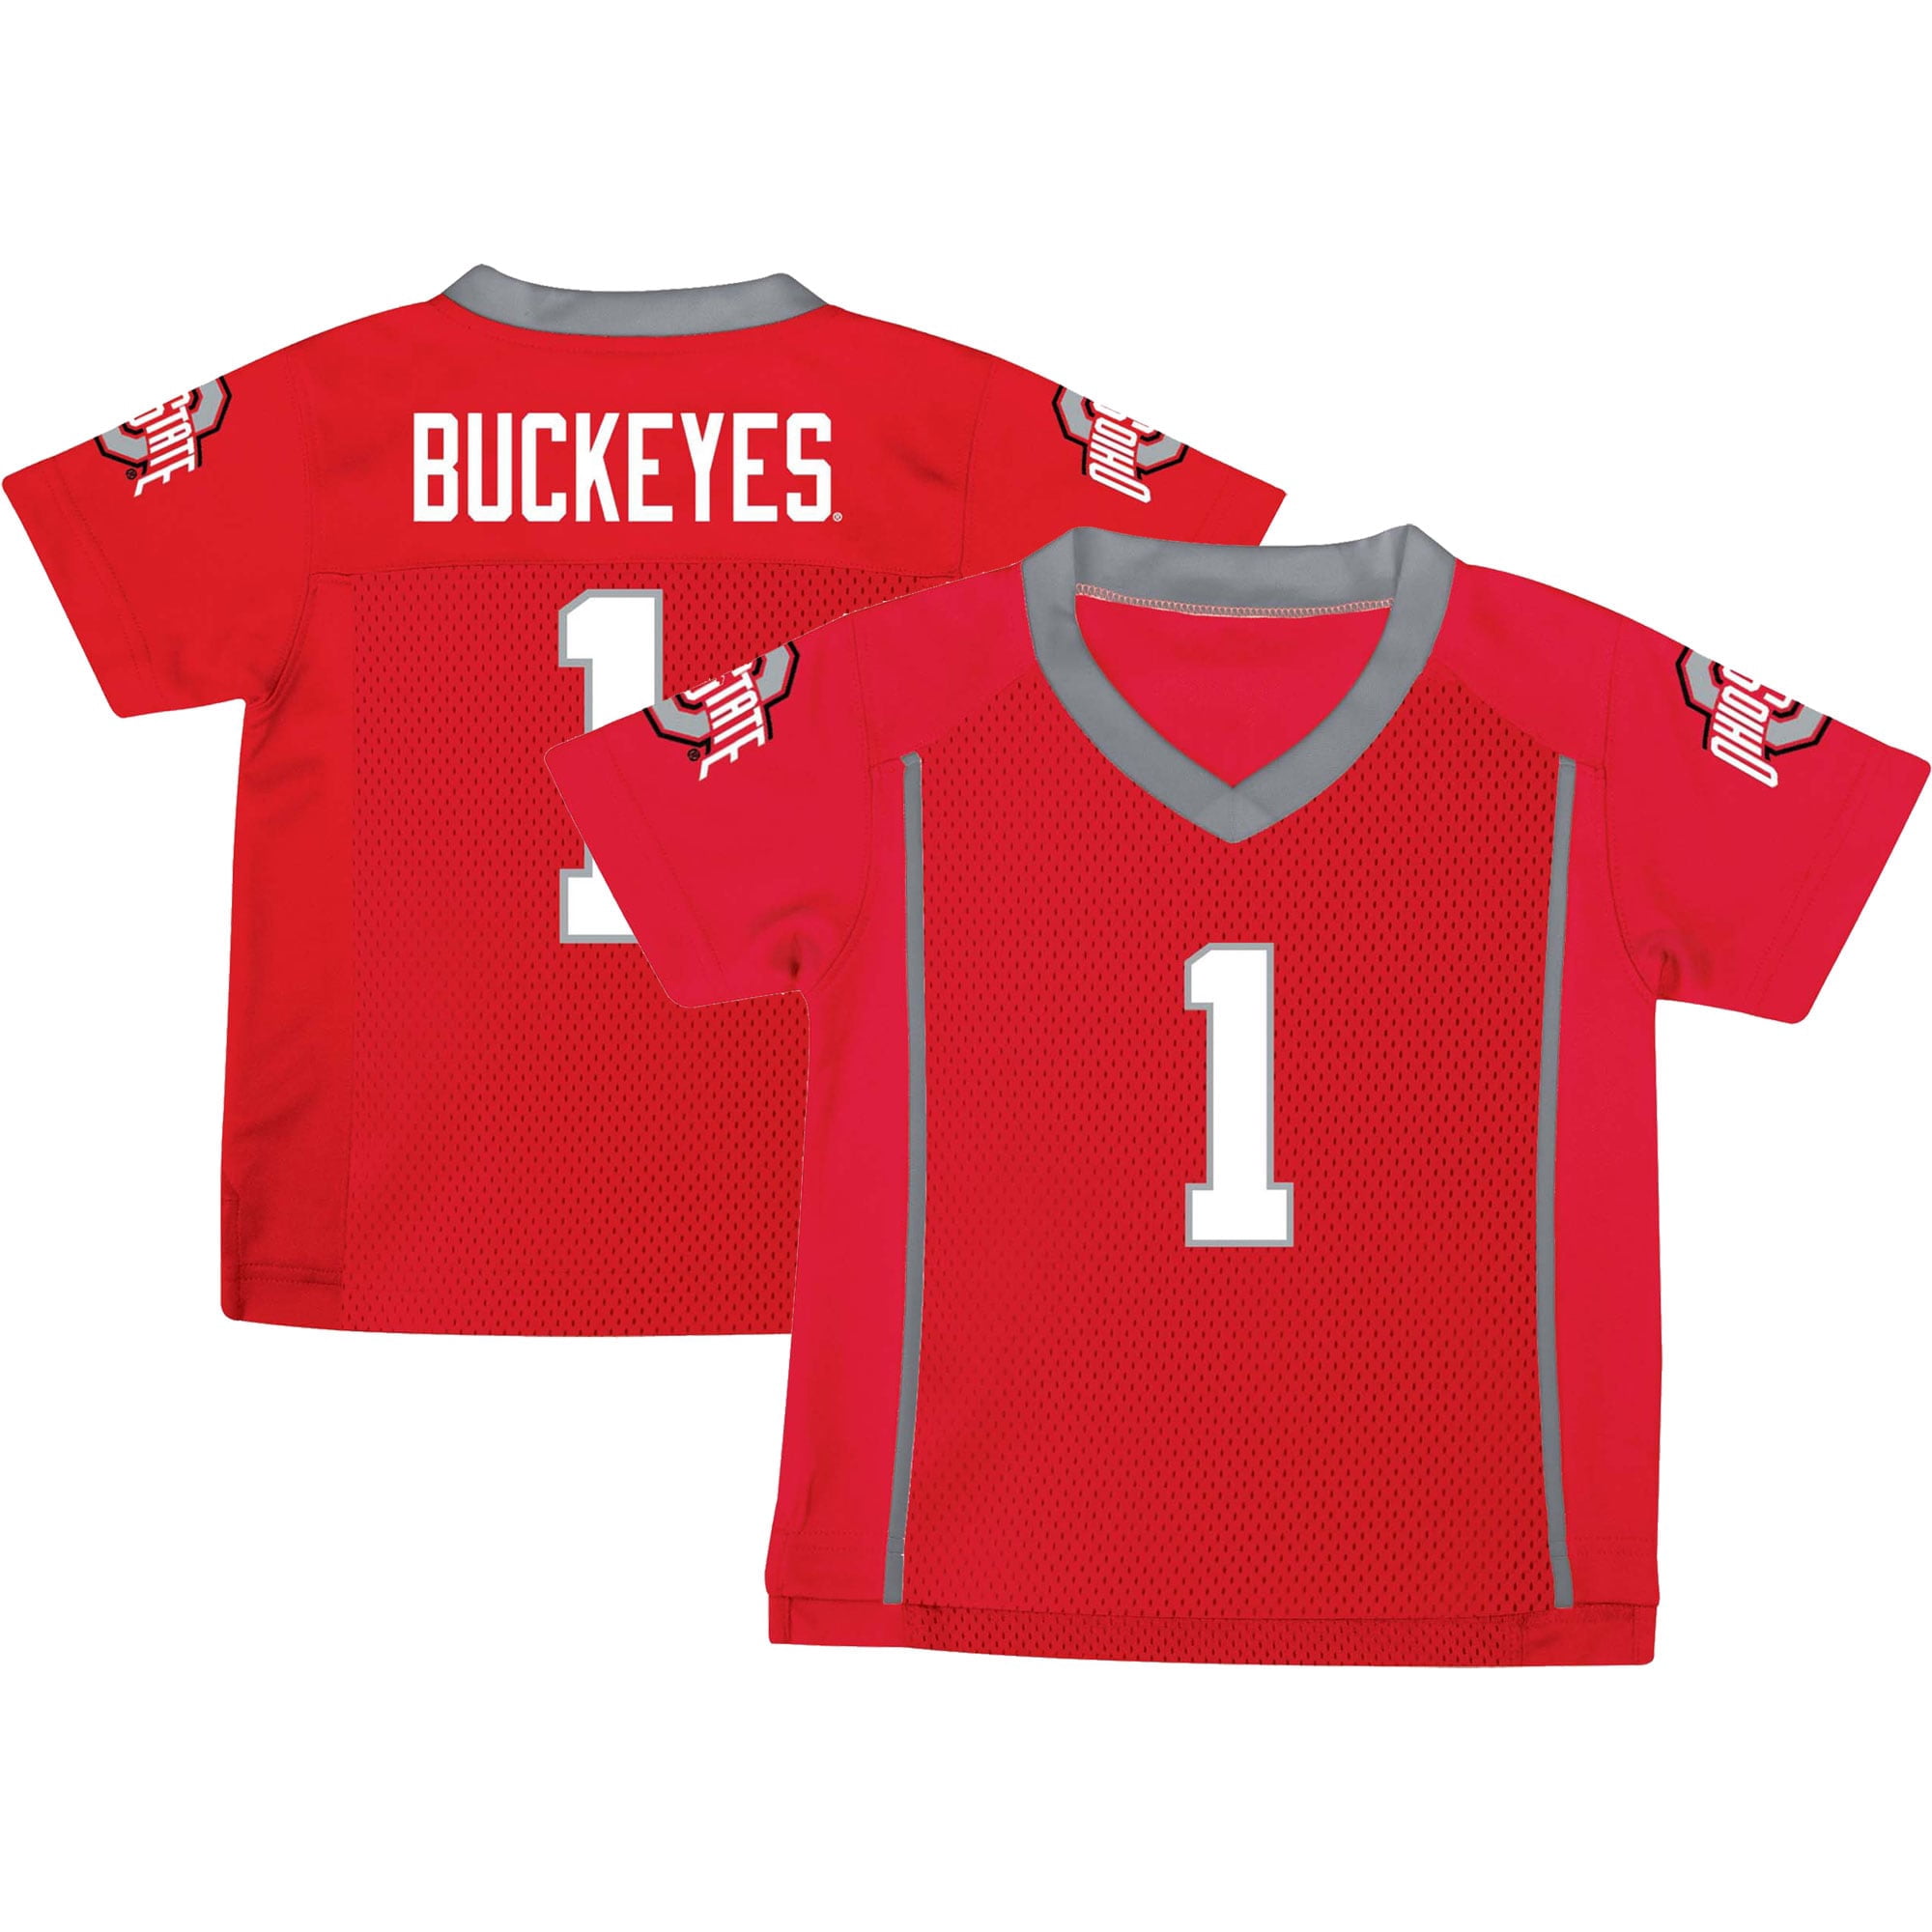 Toddler Russell Athletic Scarlet Ohio State Buckeyes Team Football